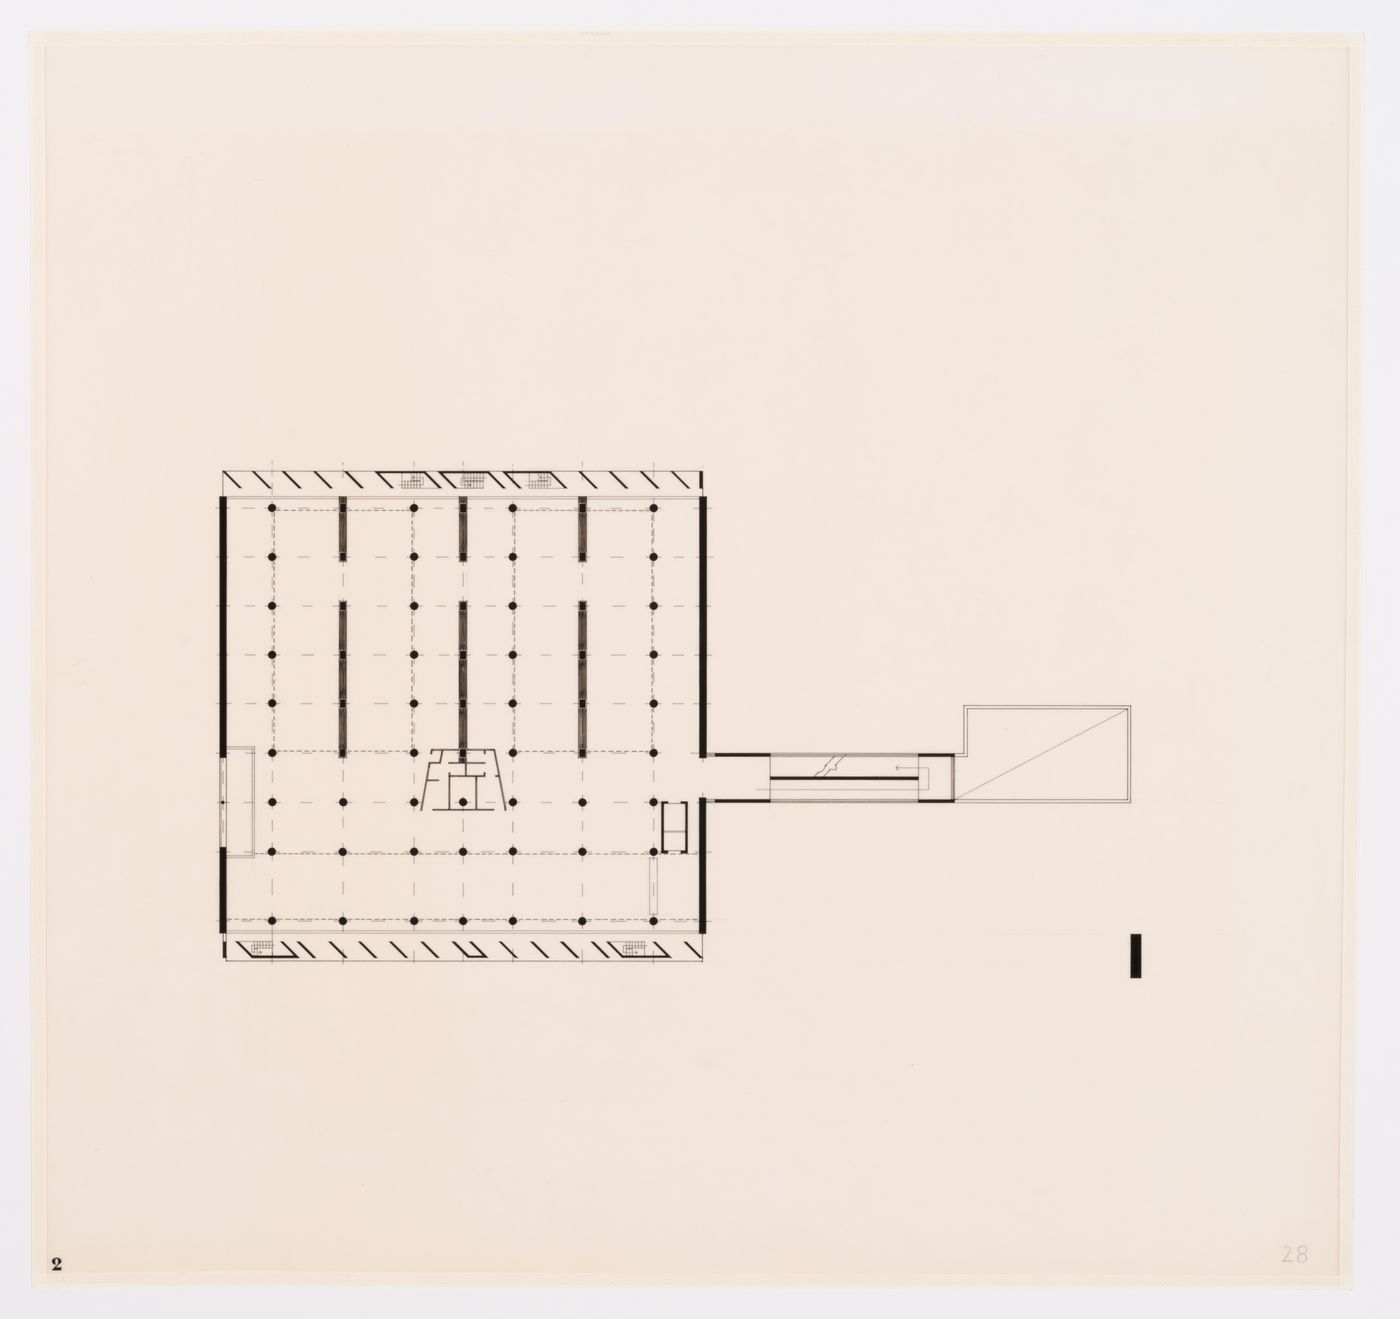 Floor plan for the Museum of Knowledge, in Sector 1, in Chandigarh, India